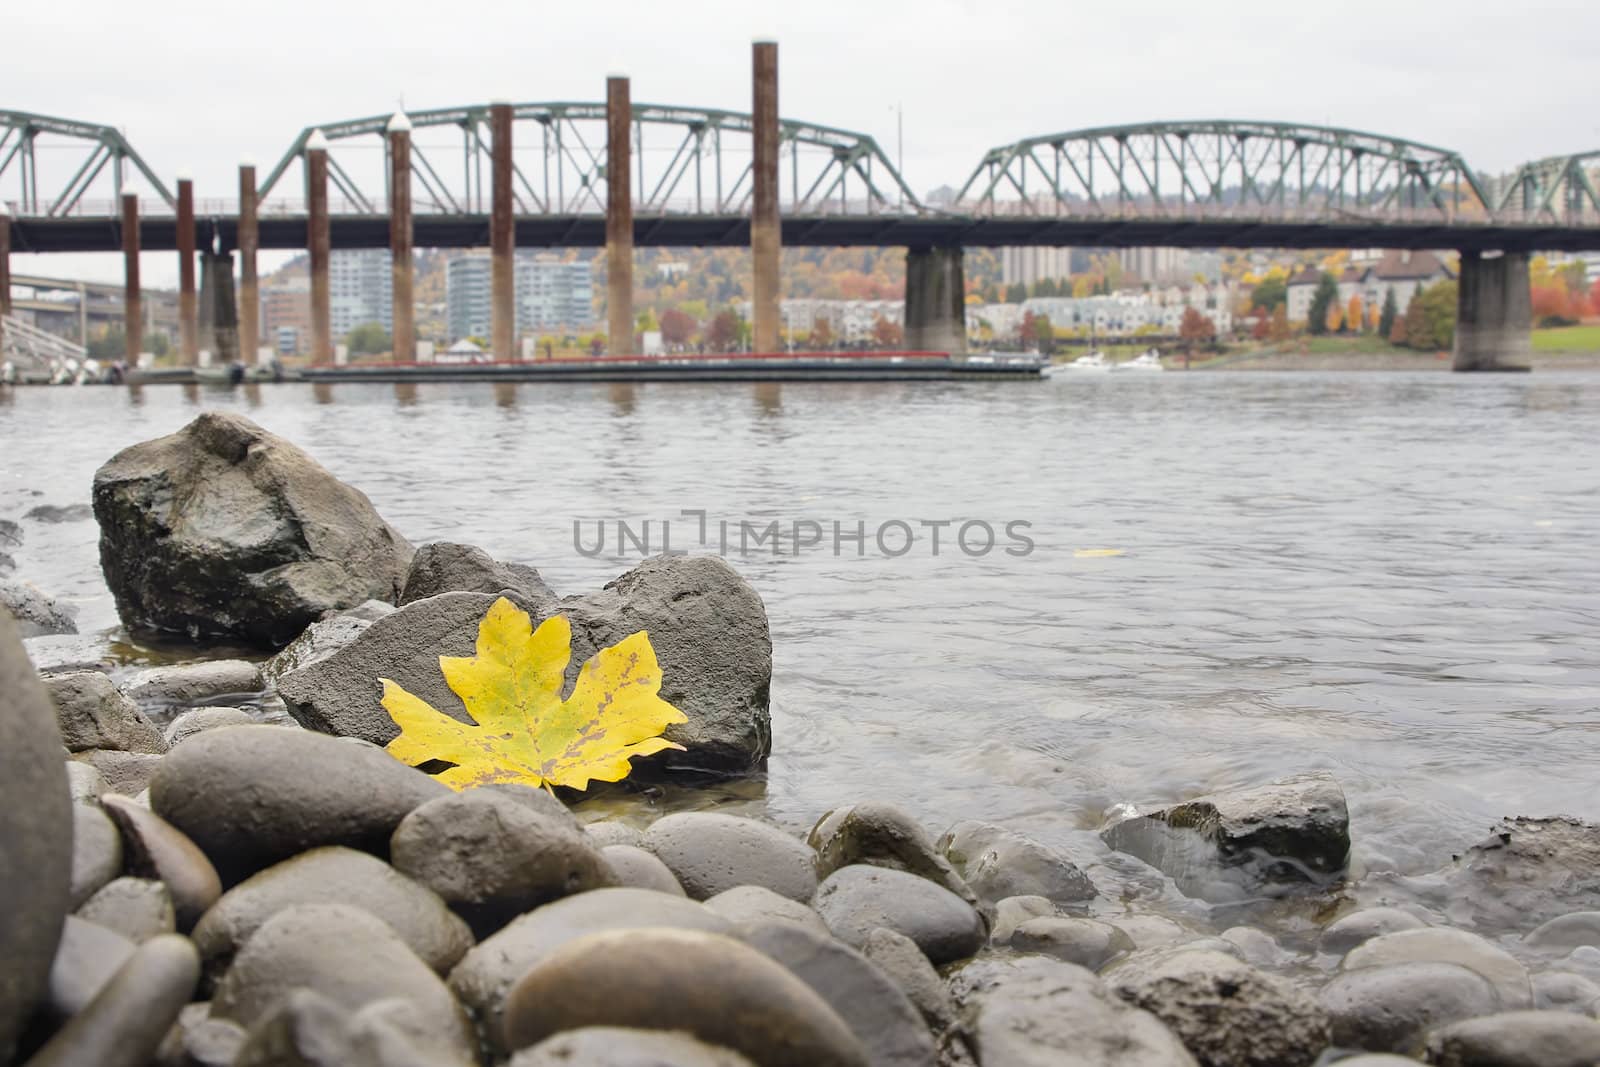 Fall Season Yellow Maple Leaf on the Rocks by the Banks of Willamette River in Portland Oregon with Hawthorne Bridge and Marina